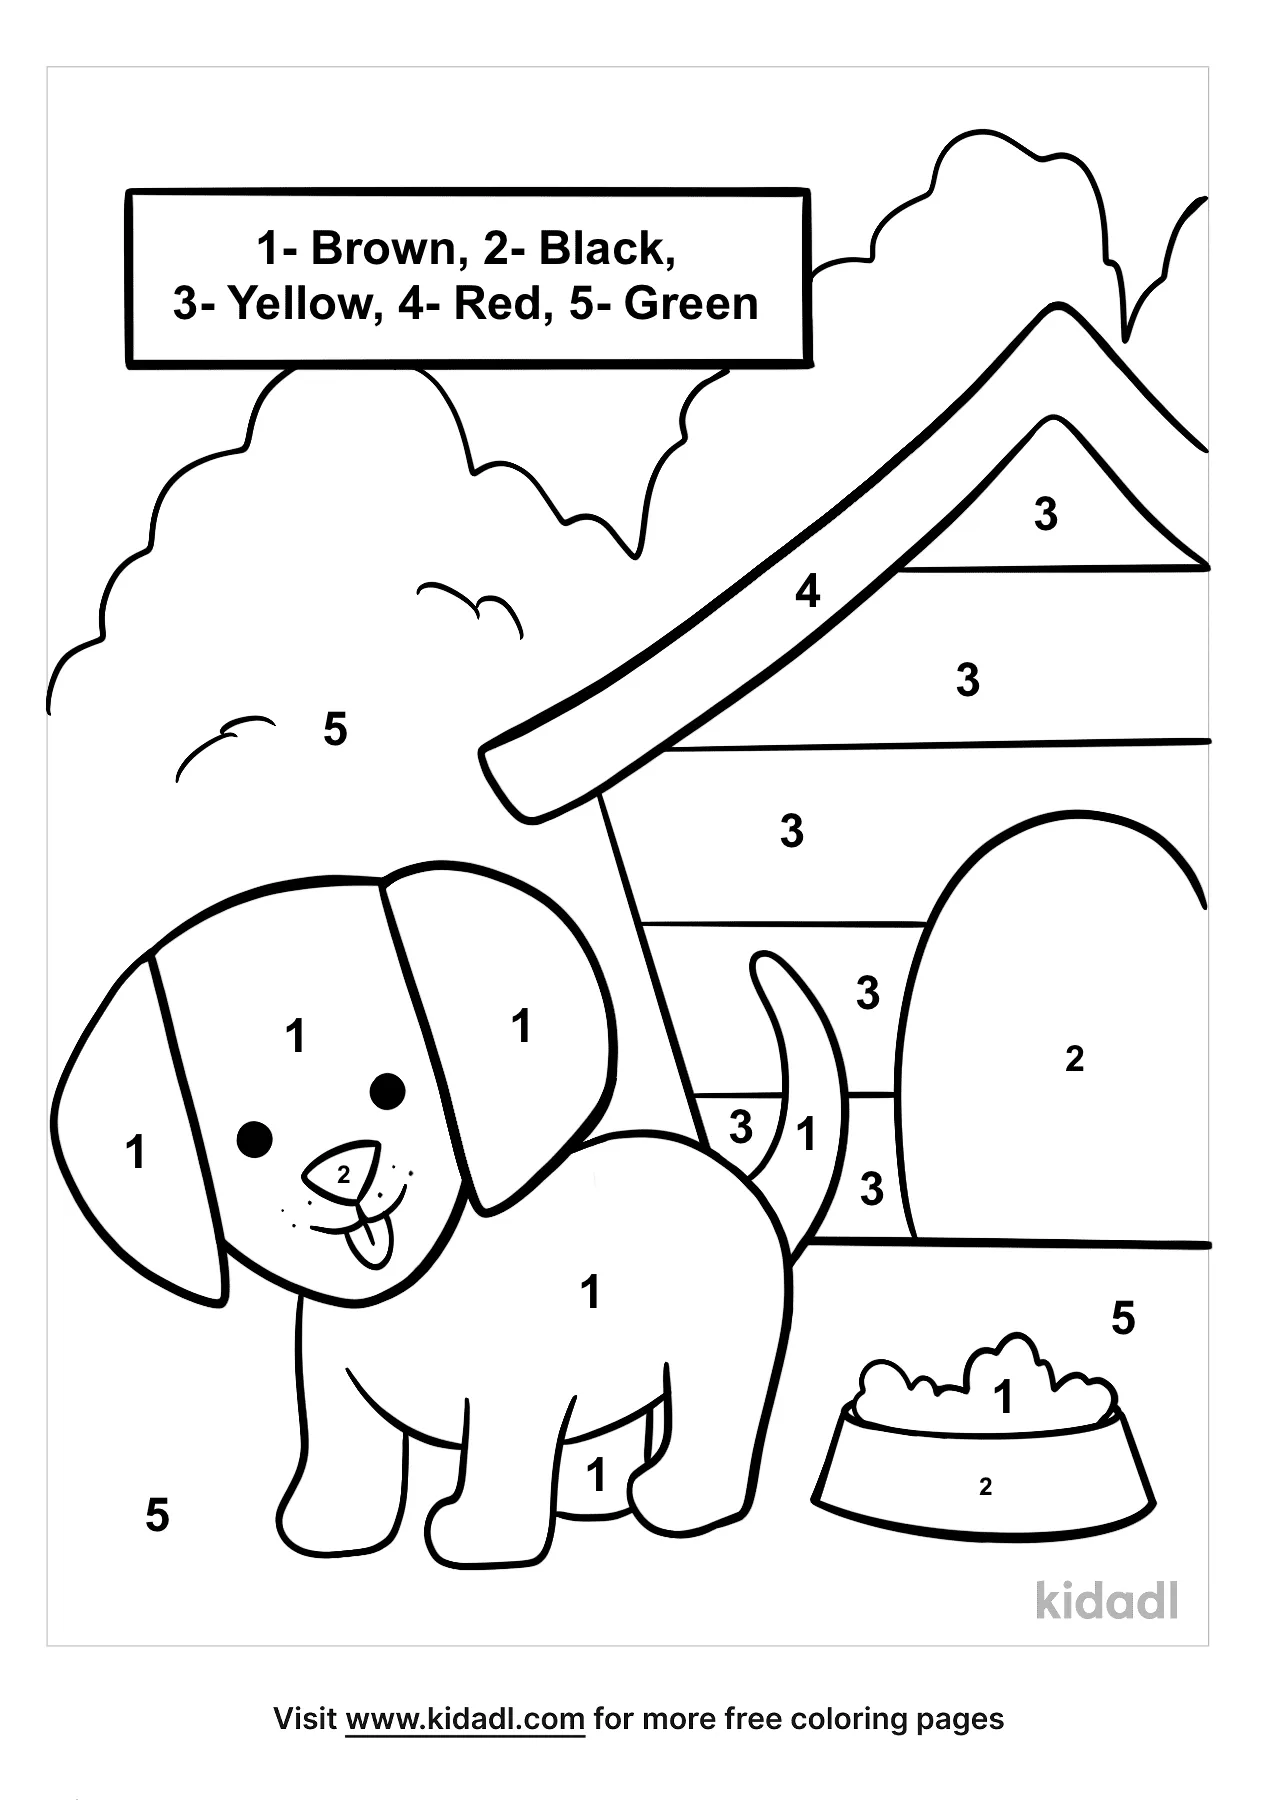 Puppy Color By Numbers Coloring Page | Free Color-by-number Coloring ...